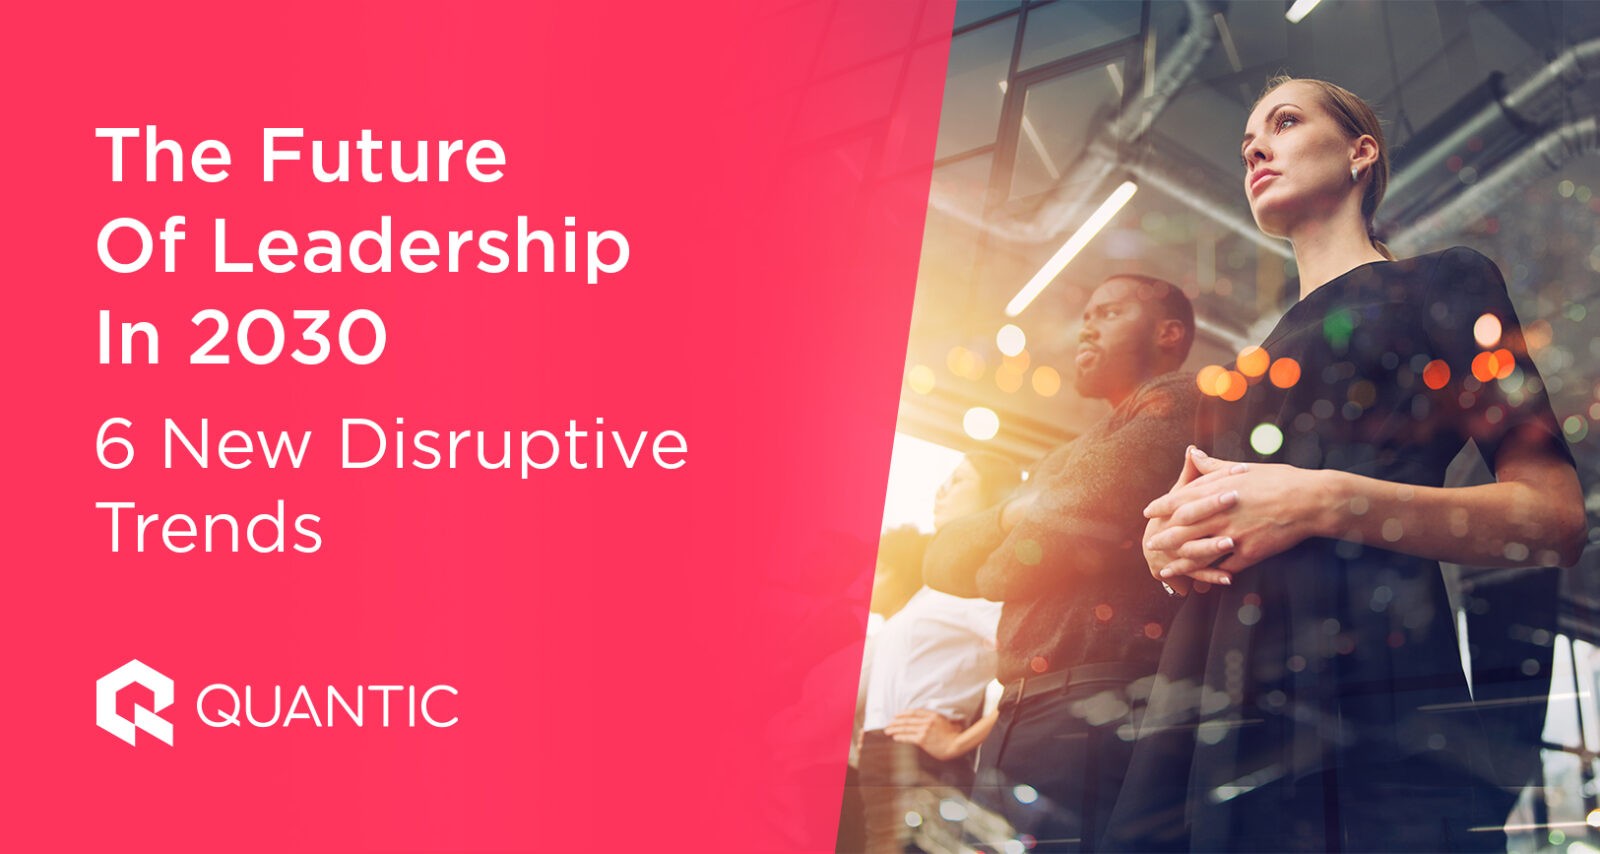 The Future of Leadership in 2030: 6 New Disruptive Trends - The